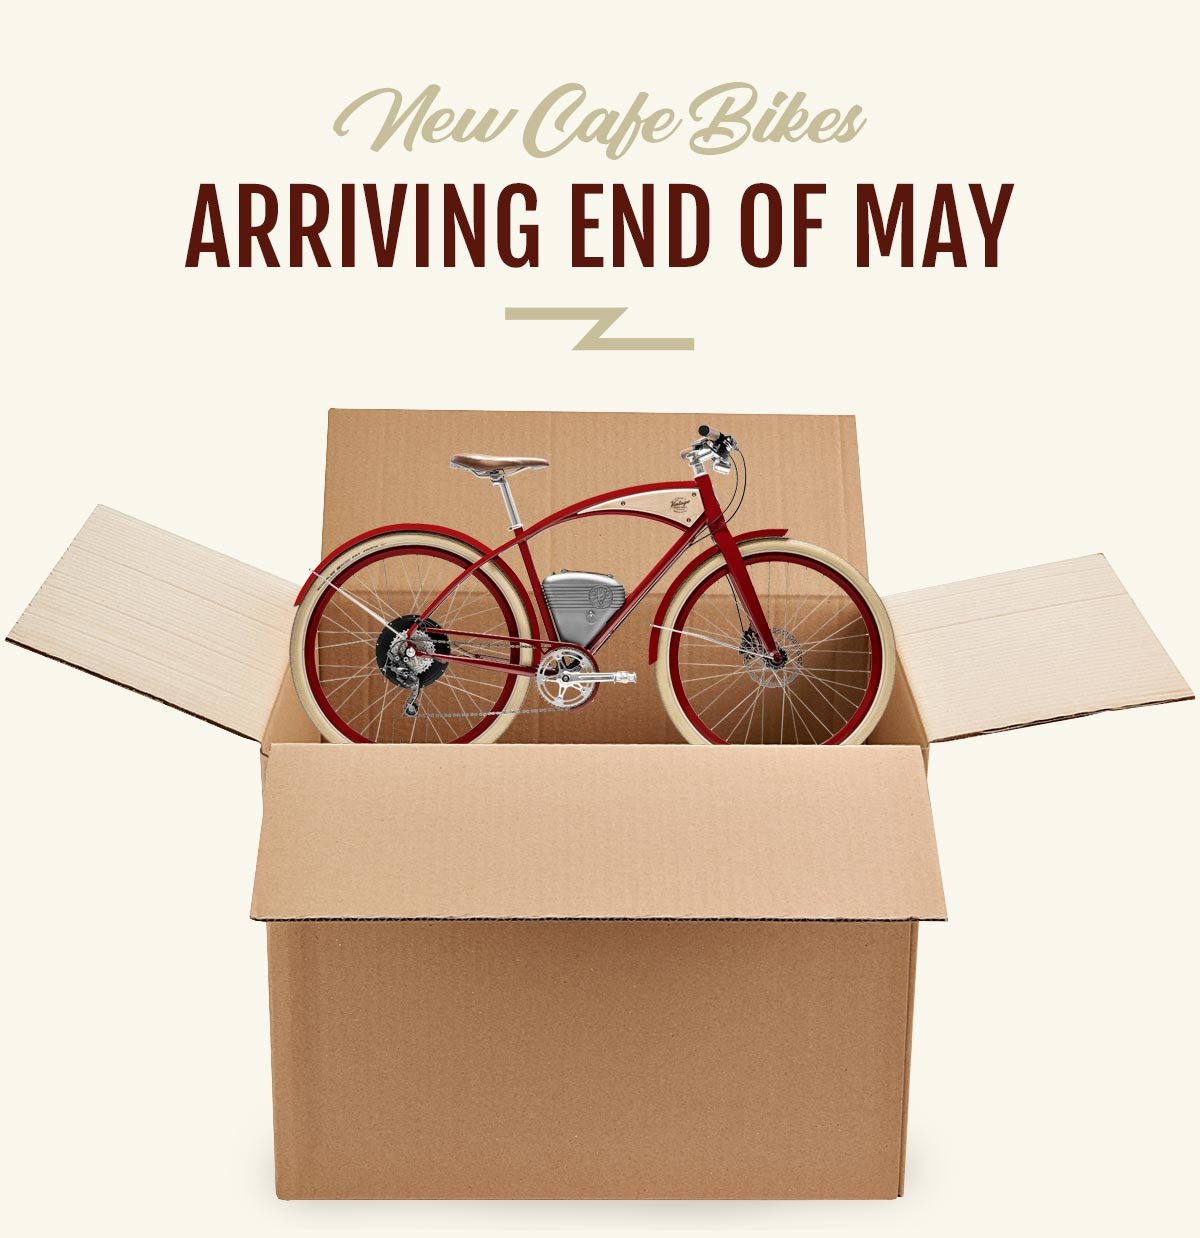 New Cafe Bikes - Arriving End of May